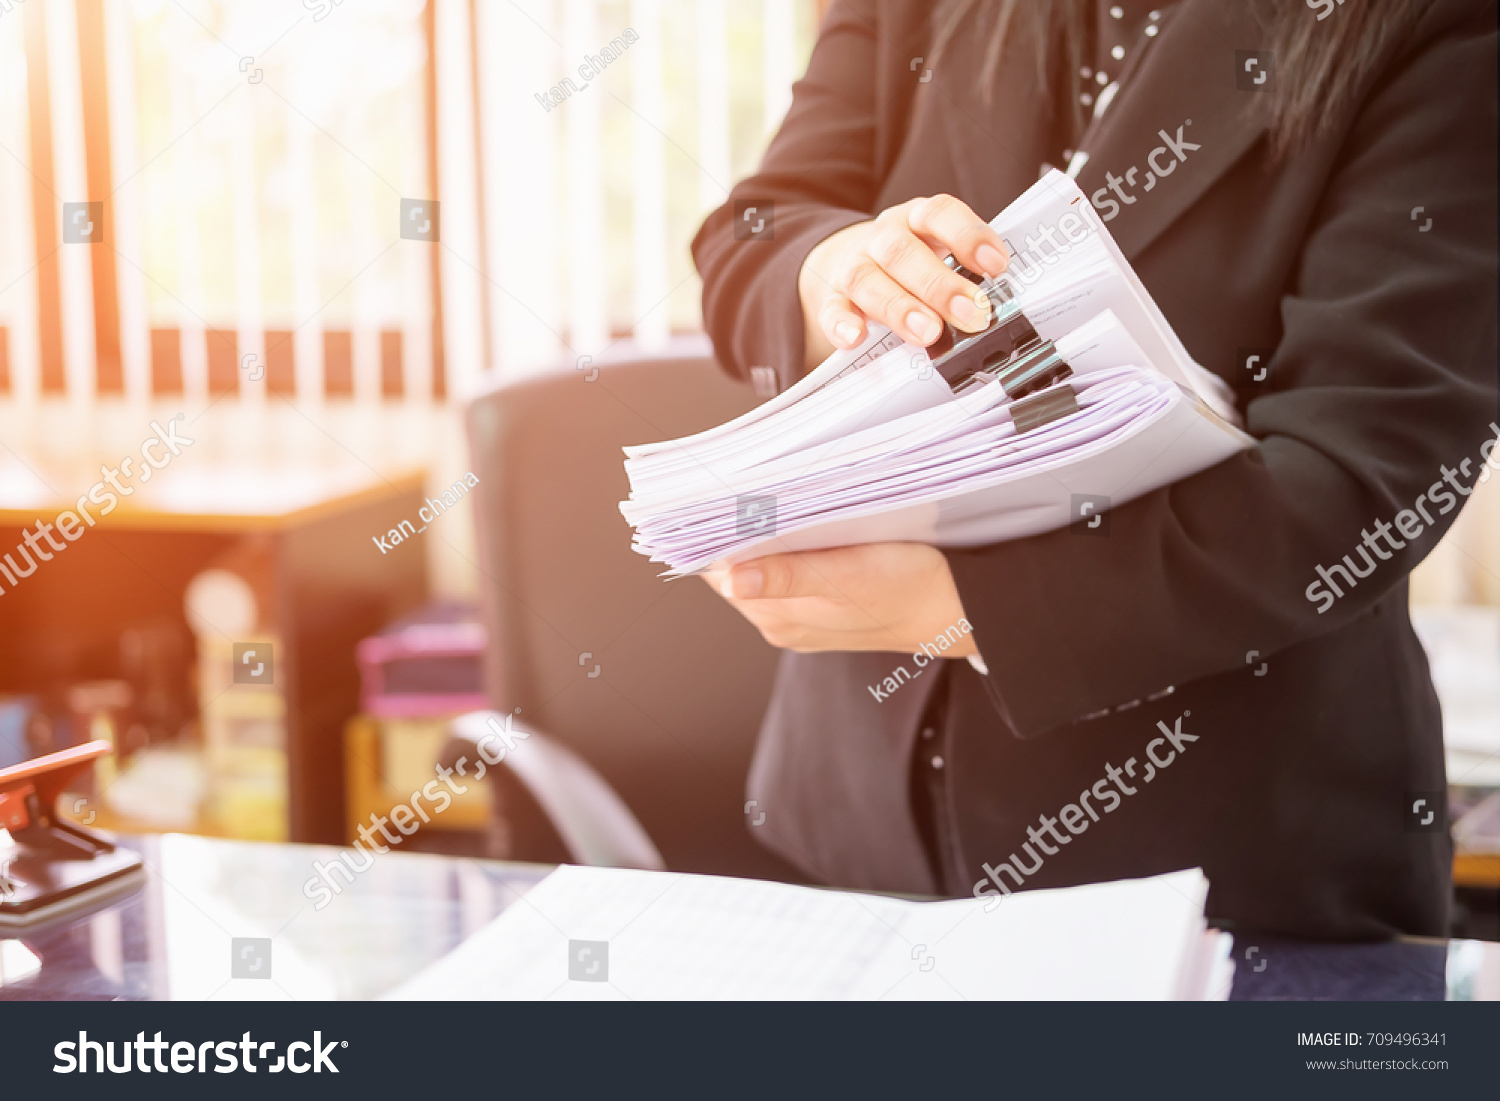 Asian business woman office workers holding are arranging documents of unfinished documents on office desk,Stack of business paper,document management,Businesswoman examining documents
 #709496341